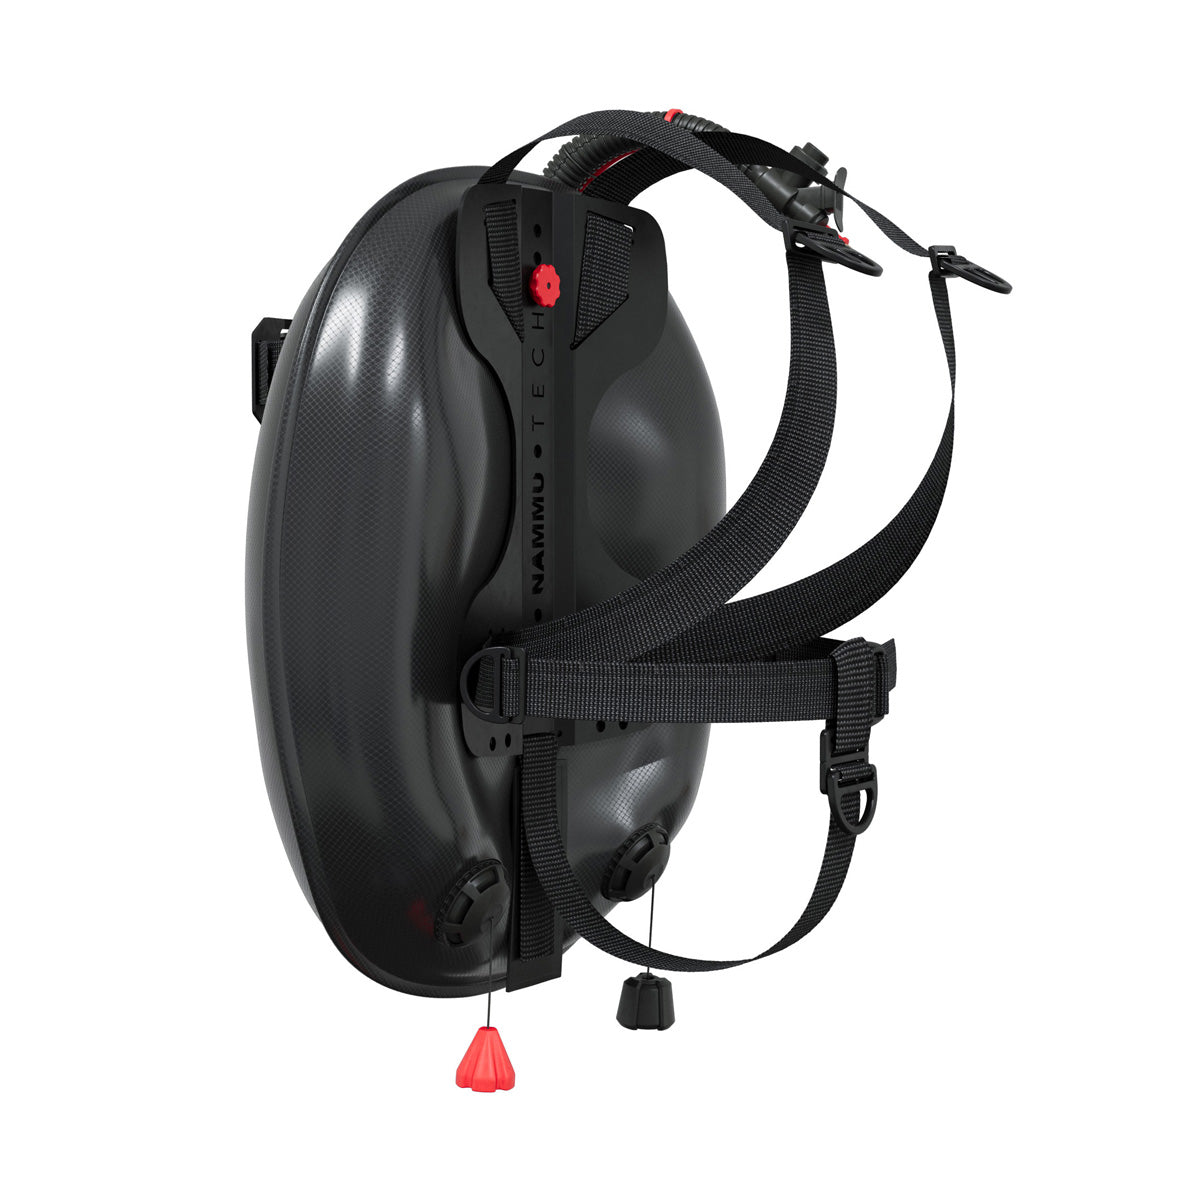 Leviathan Backmount Diving Harness